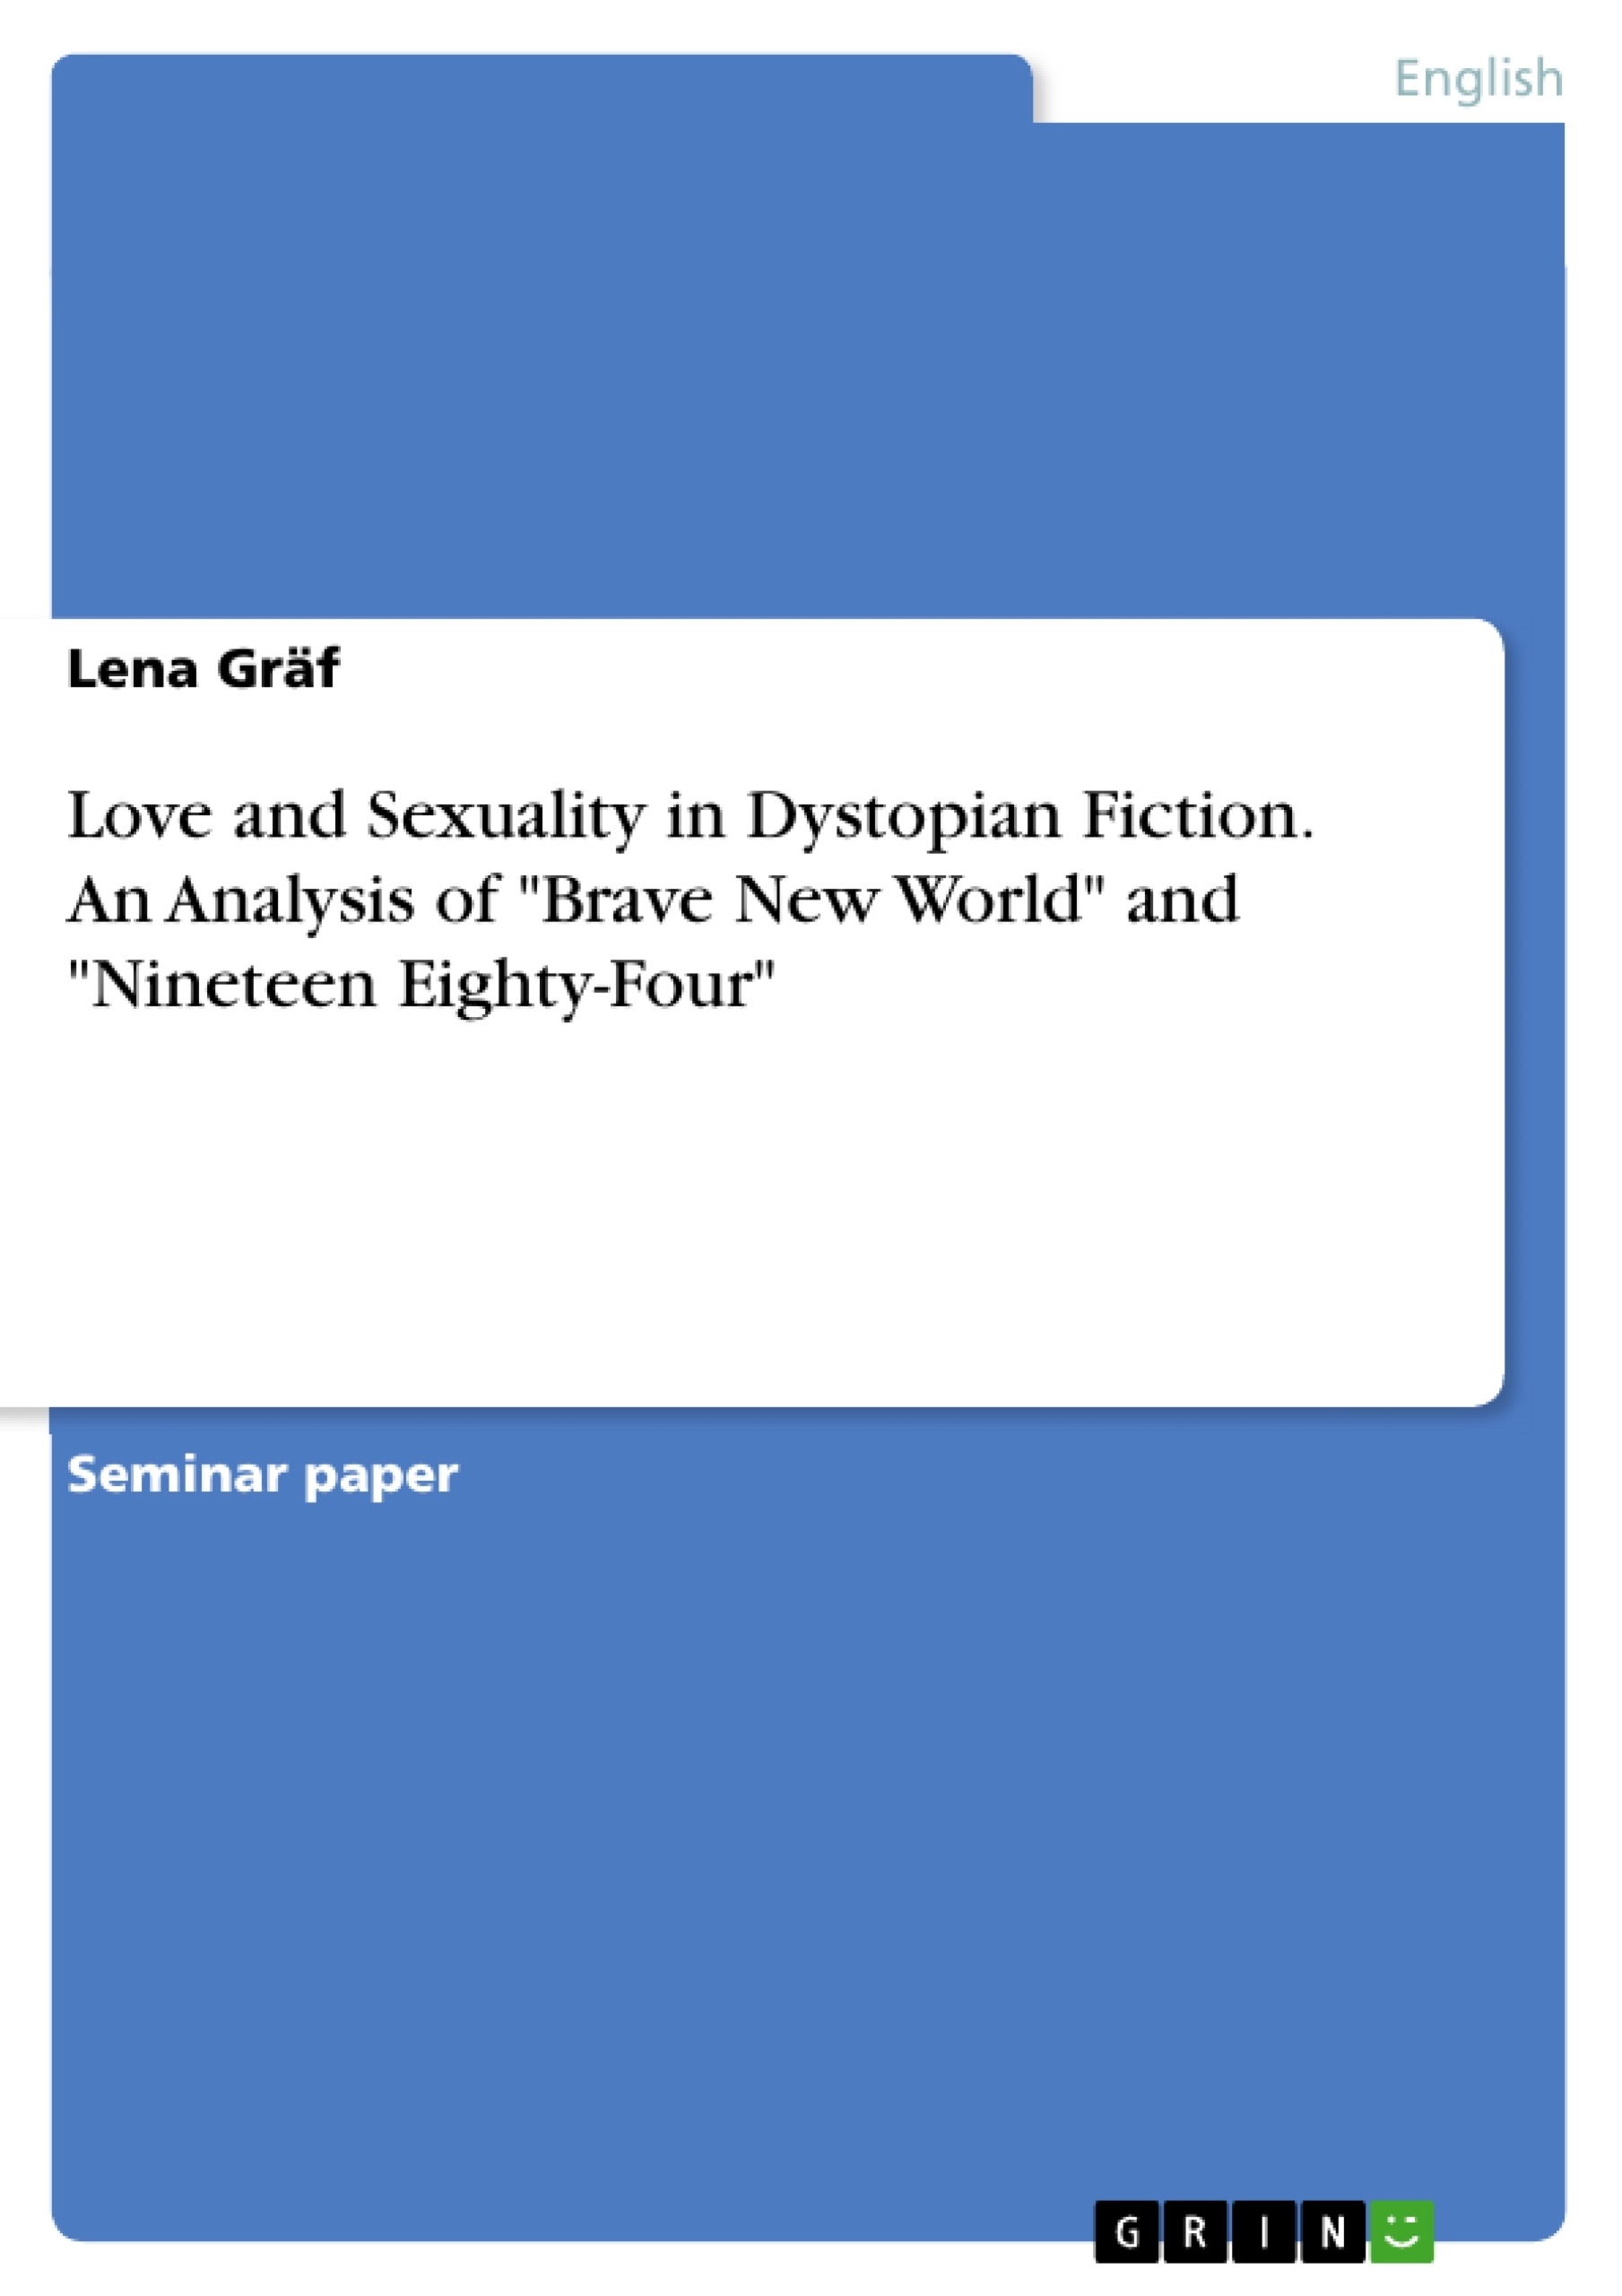 Titre: Love and Sexuality in Dystopian Fiction. An Analysis of "Brave New World" and "Nineteen Eighty-Four"